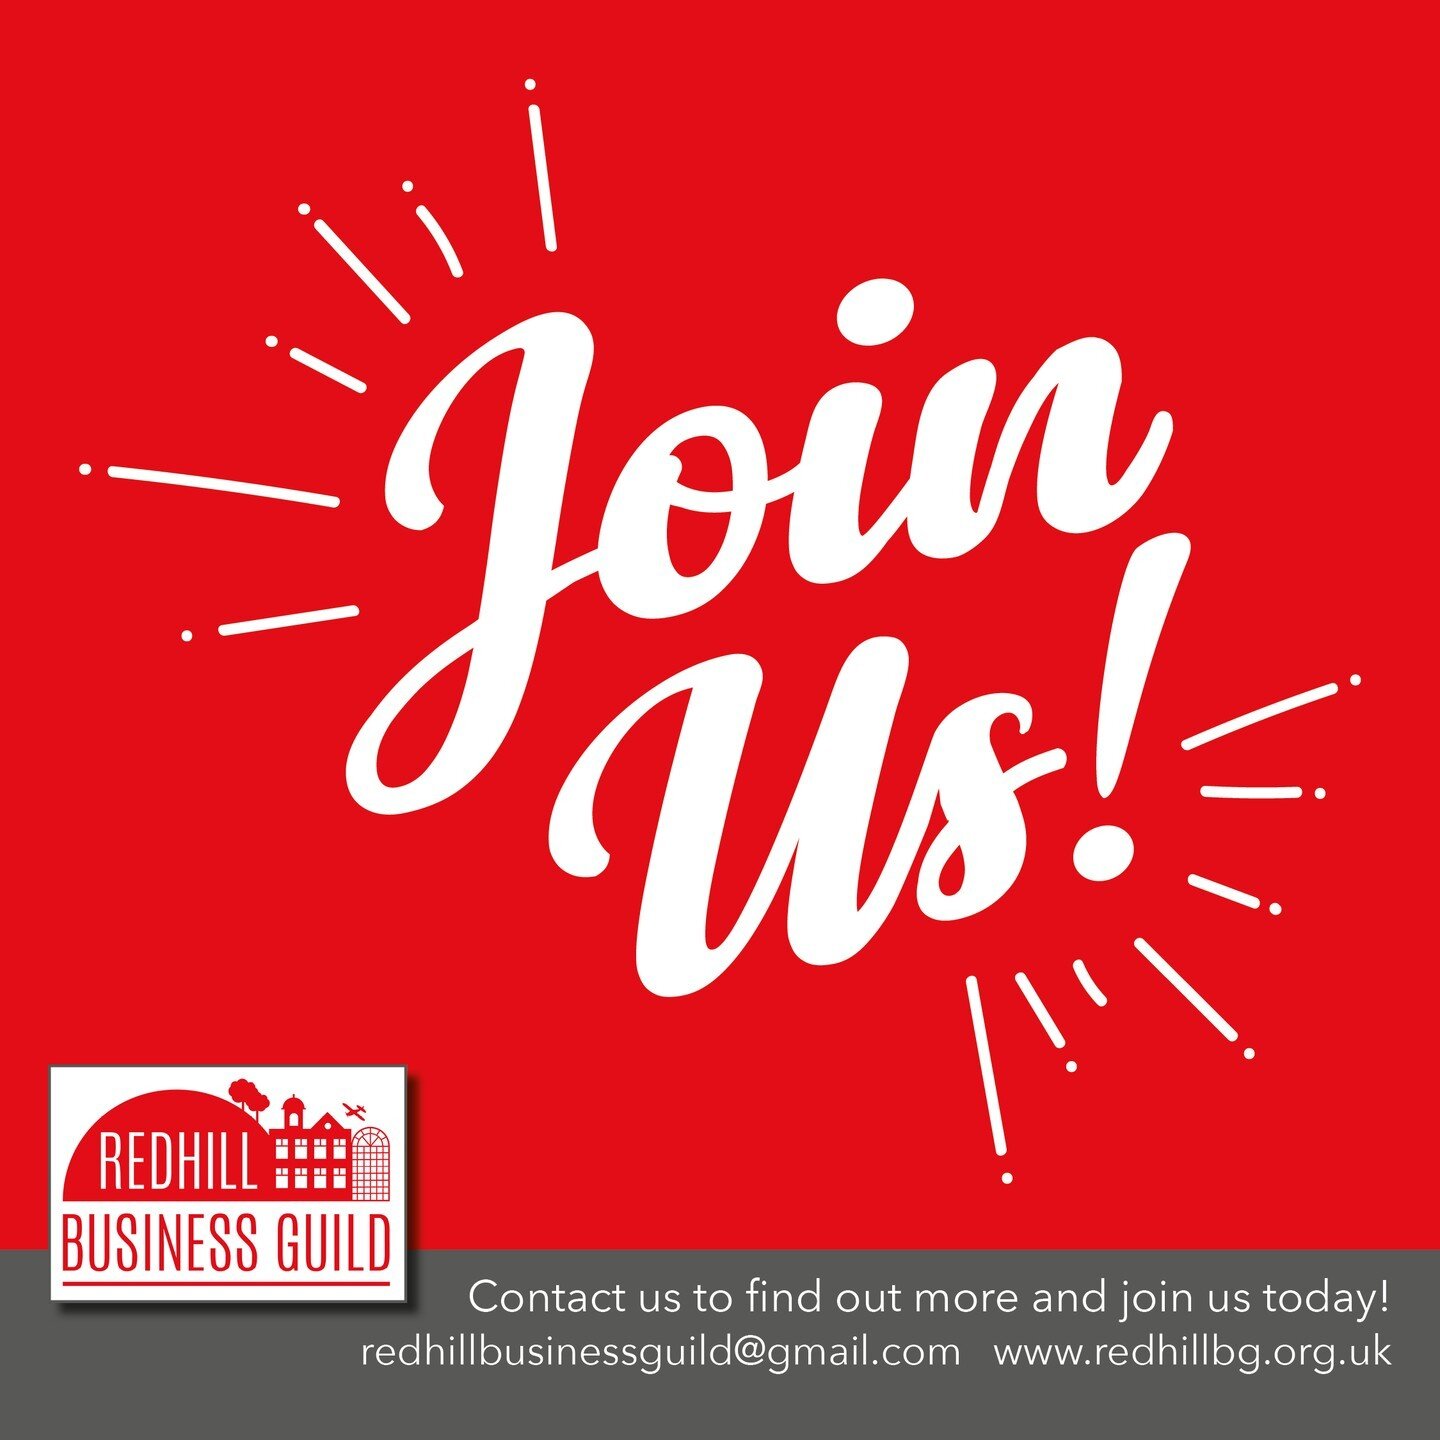 🏡Join the Redhill Business Guild this year for just &pound;75 📣

- Business networking
- Invitations to speak/present to the group
- Promotional support via social media and guild newsletter
- Have your voice heard on local issues

#RedhillBusiness